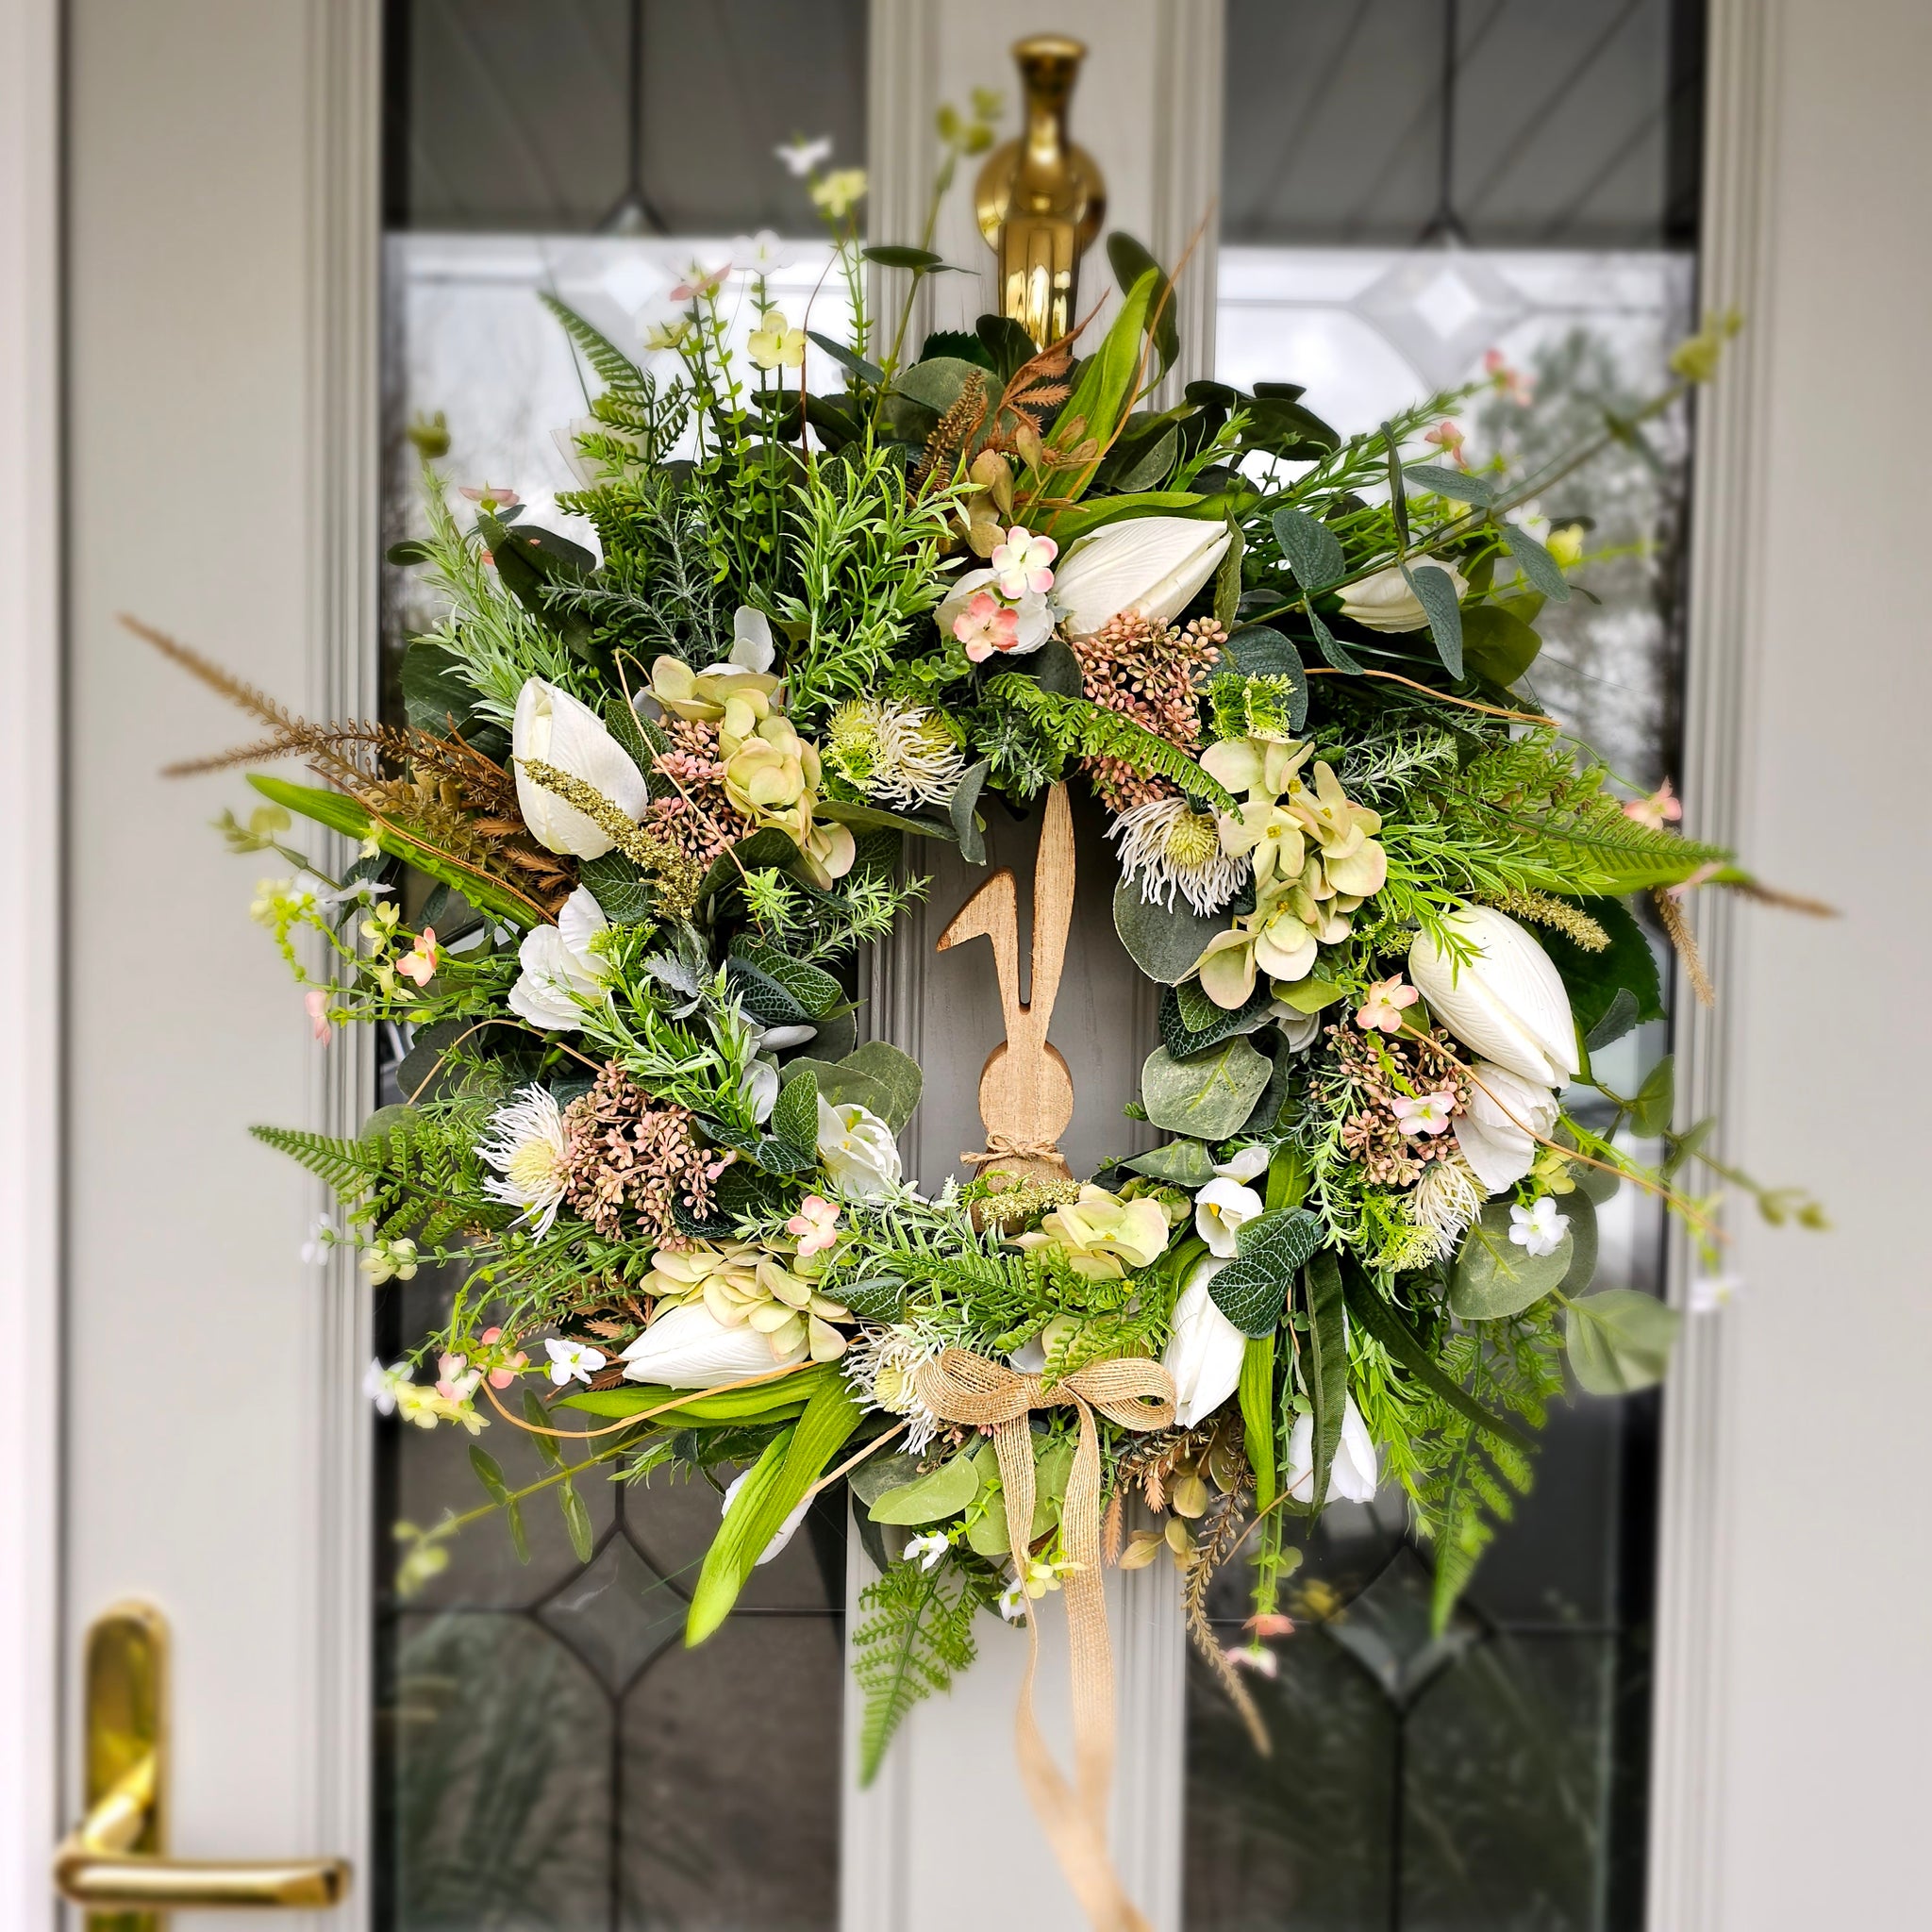 The Easter Rambles wreath